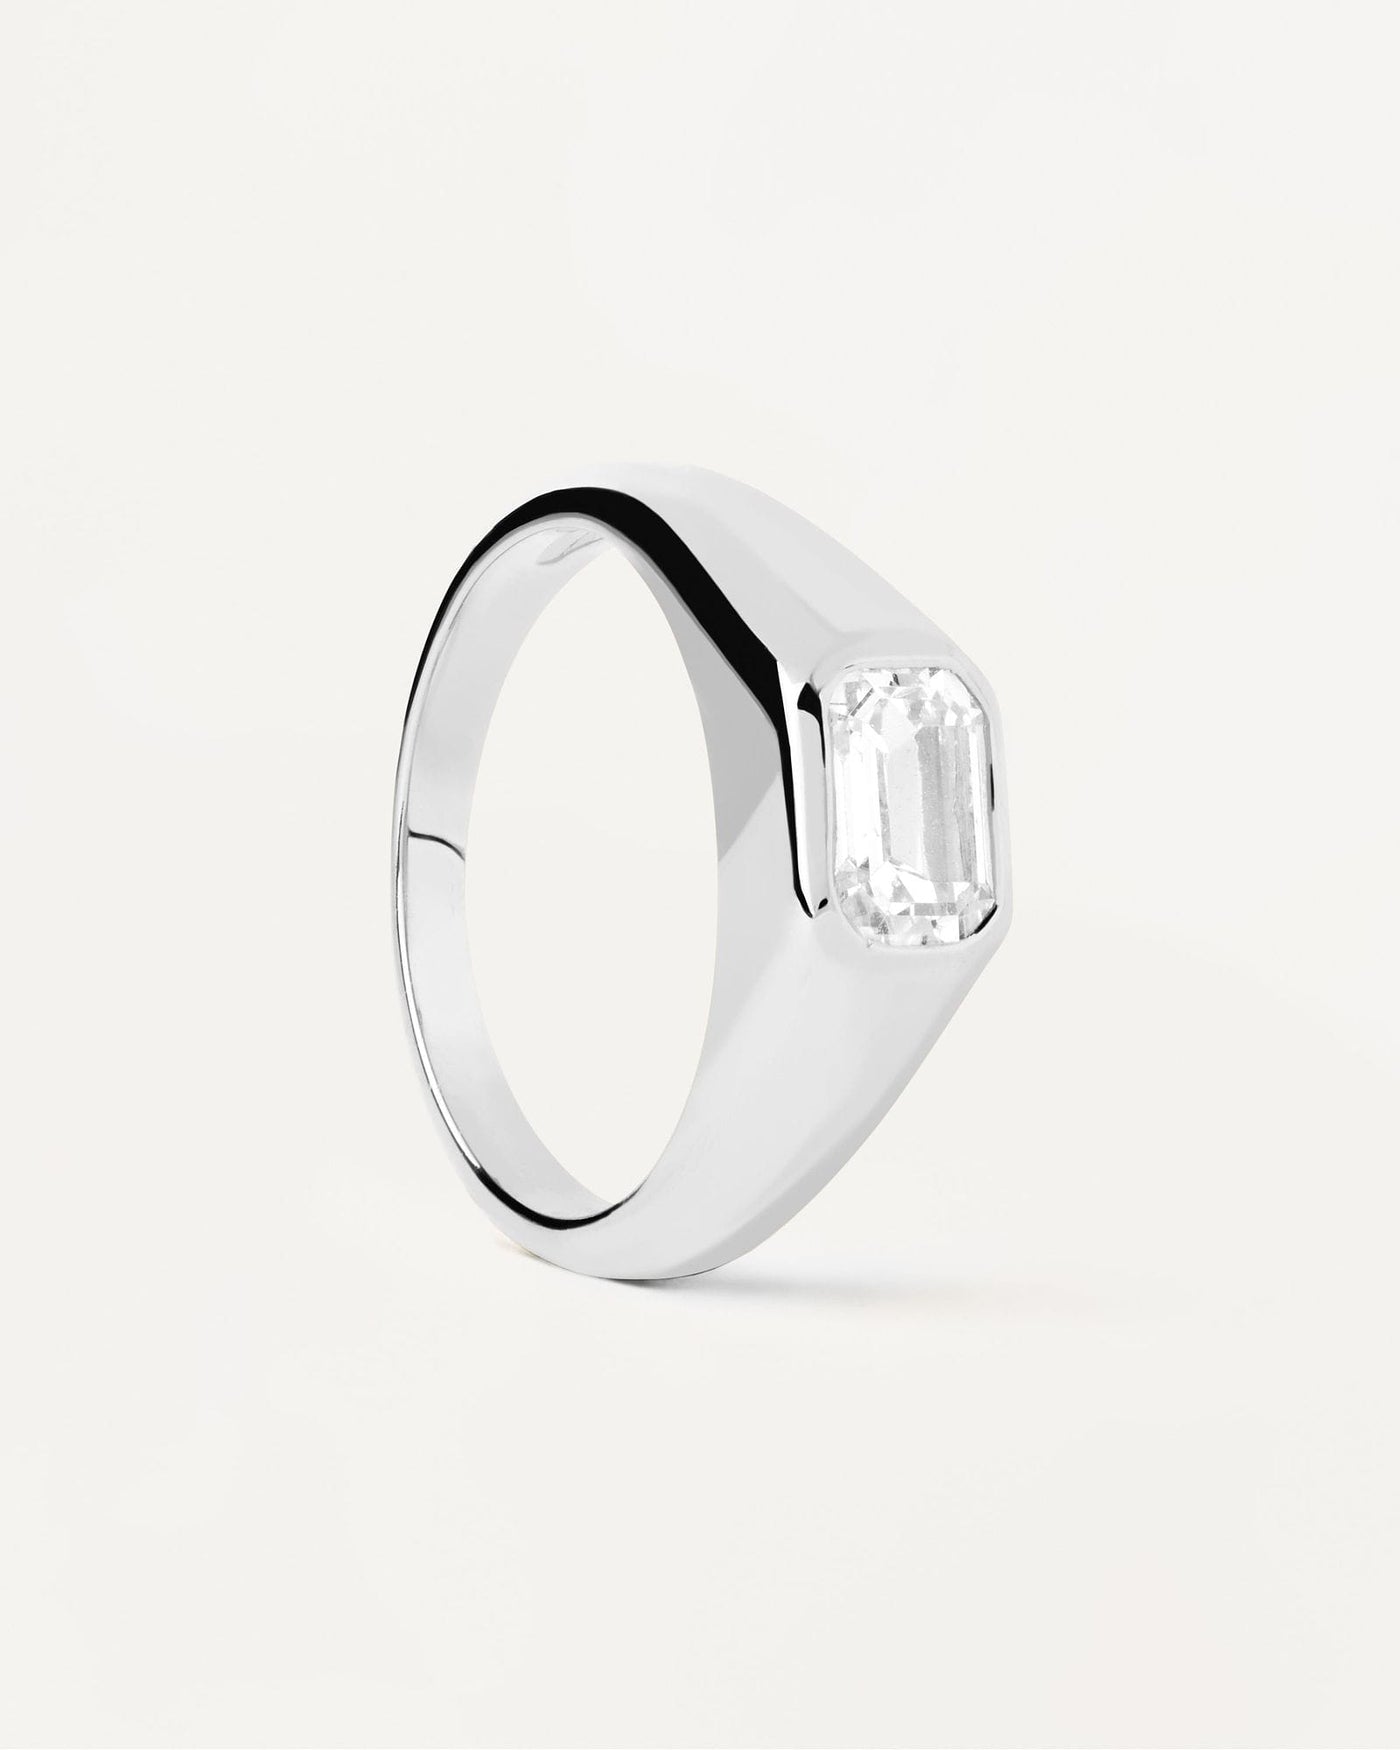 2024 Selection | Octagon Shimmer Stamp Silver Ring. Sterling silver signet ring with rectangular white zirconia. Get the latest arrival from PDPAOLA. Place your order safely and get this Best Seller. Free Shipping.